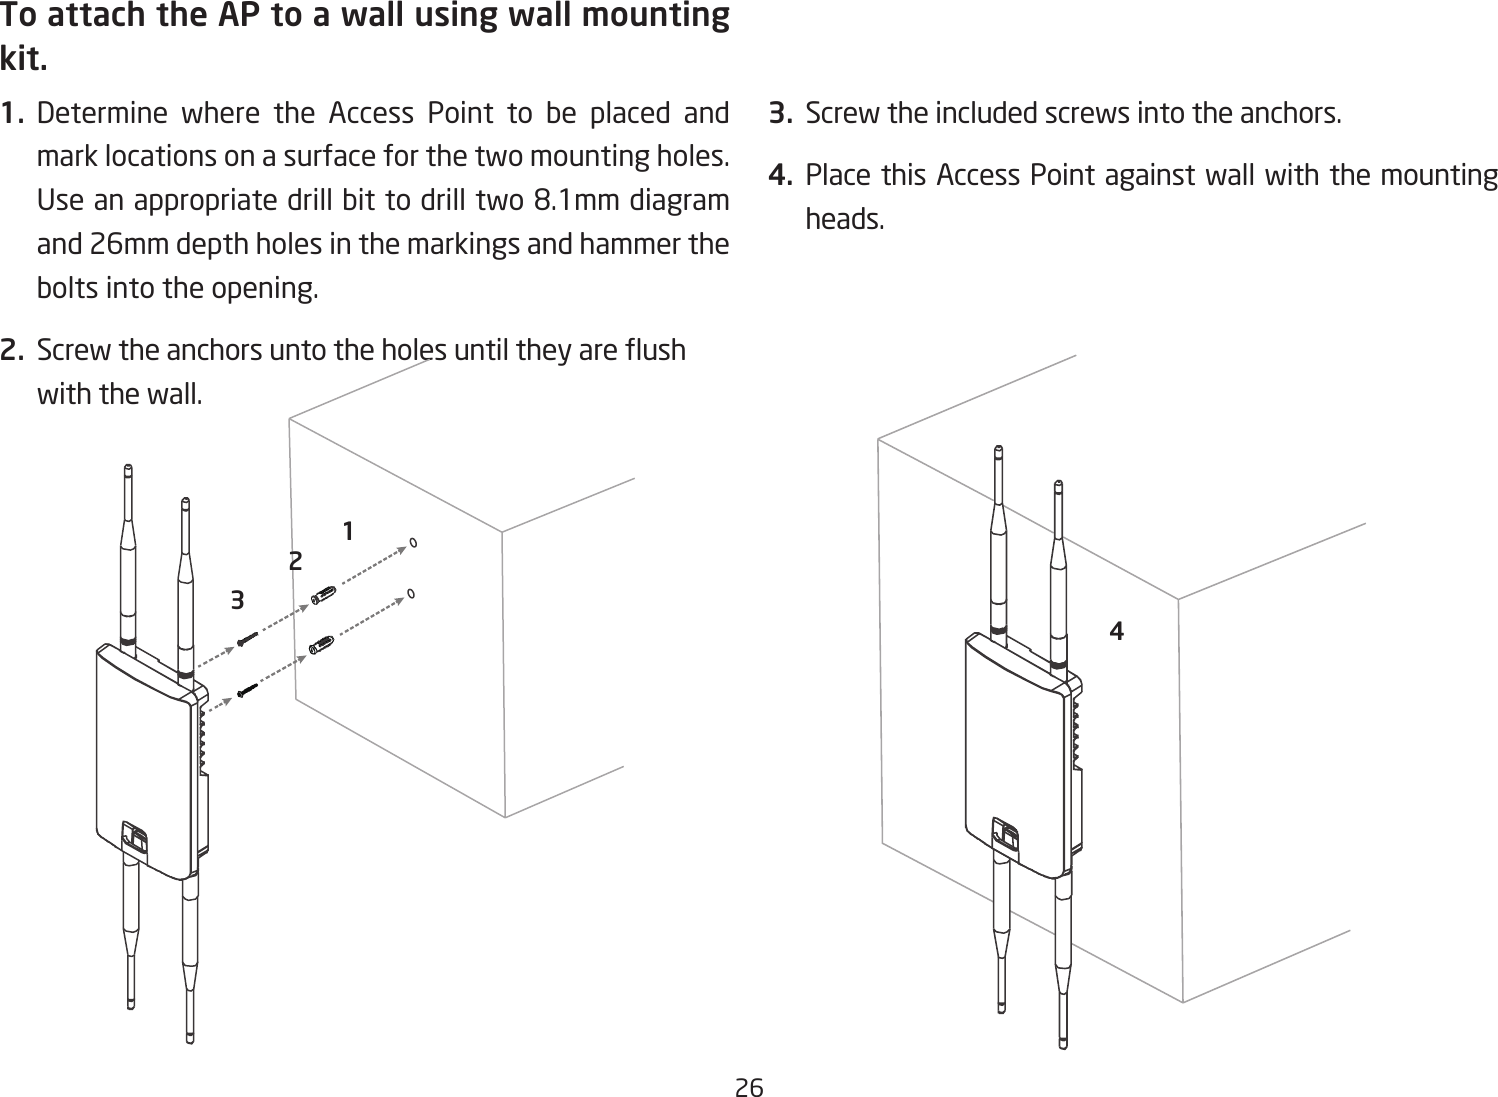 26To attach the AP to a wall using wall mounting kit.1.  Determine where the Access Point to be placed and mark locations on a surface for the two mounting holes. Useanappropriatedrillbittodrilltwo8.1mmdiagramand 26mm depth holes in the markings and hammer the bolts into the opening.2. Screwtheanchorsuntotheholesuntiltheyareushwith the wall. 3.  Screw the included screws into the anchors.4. Place this Access Point against wall with the mounting heads.1243